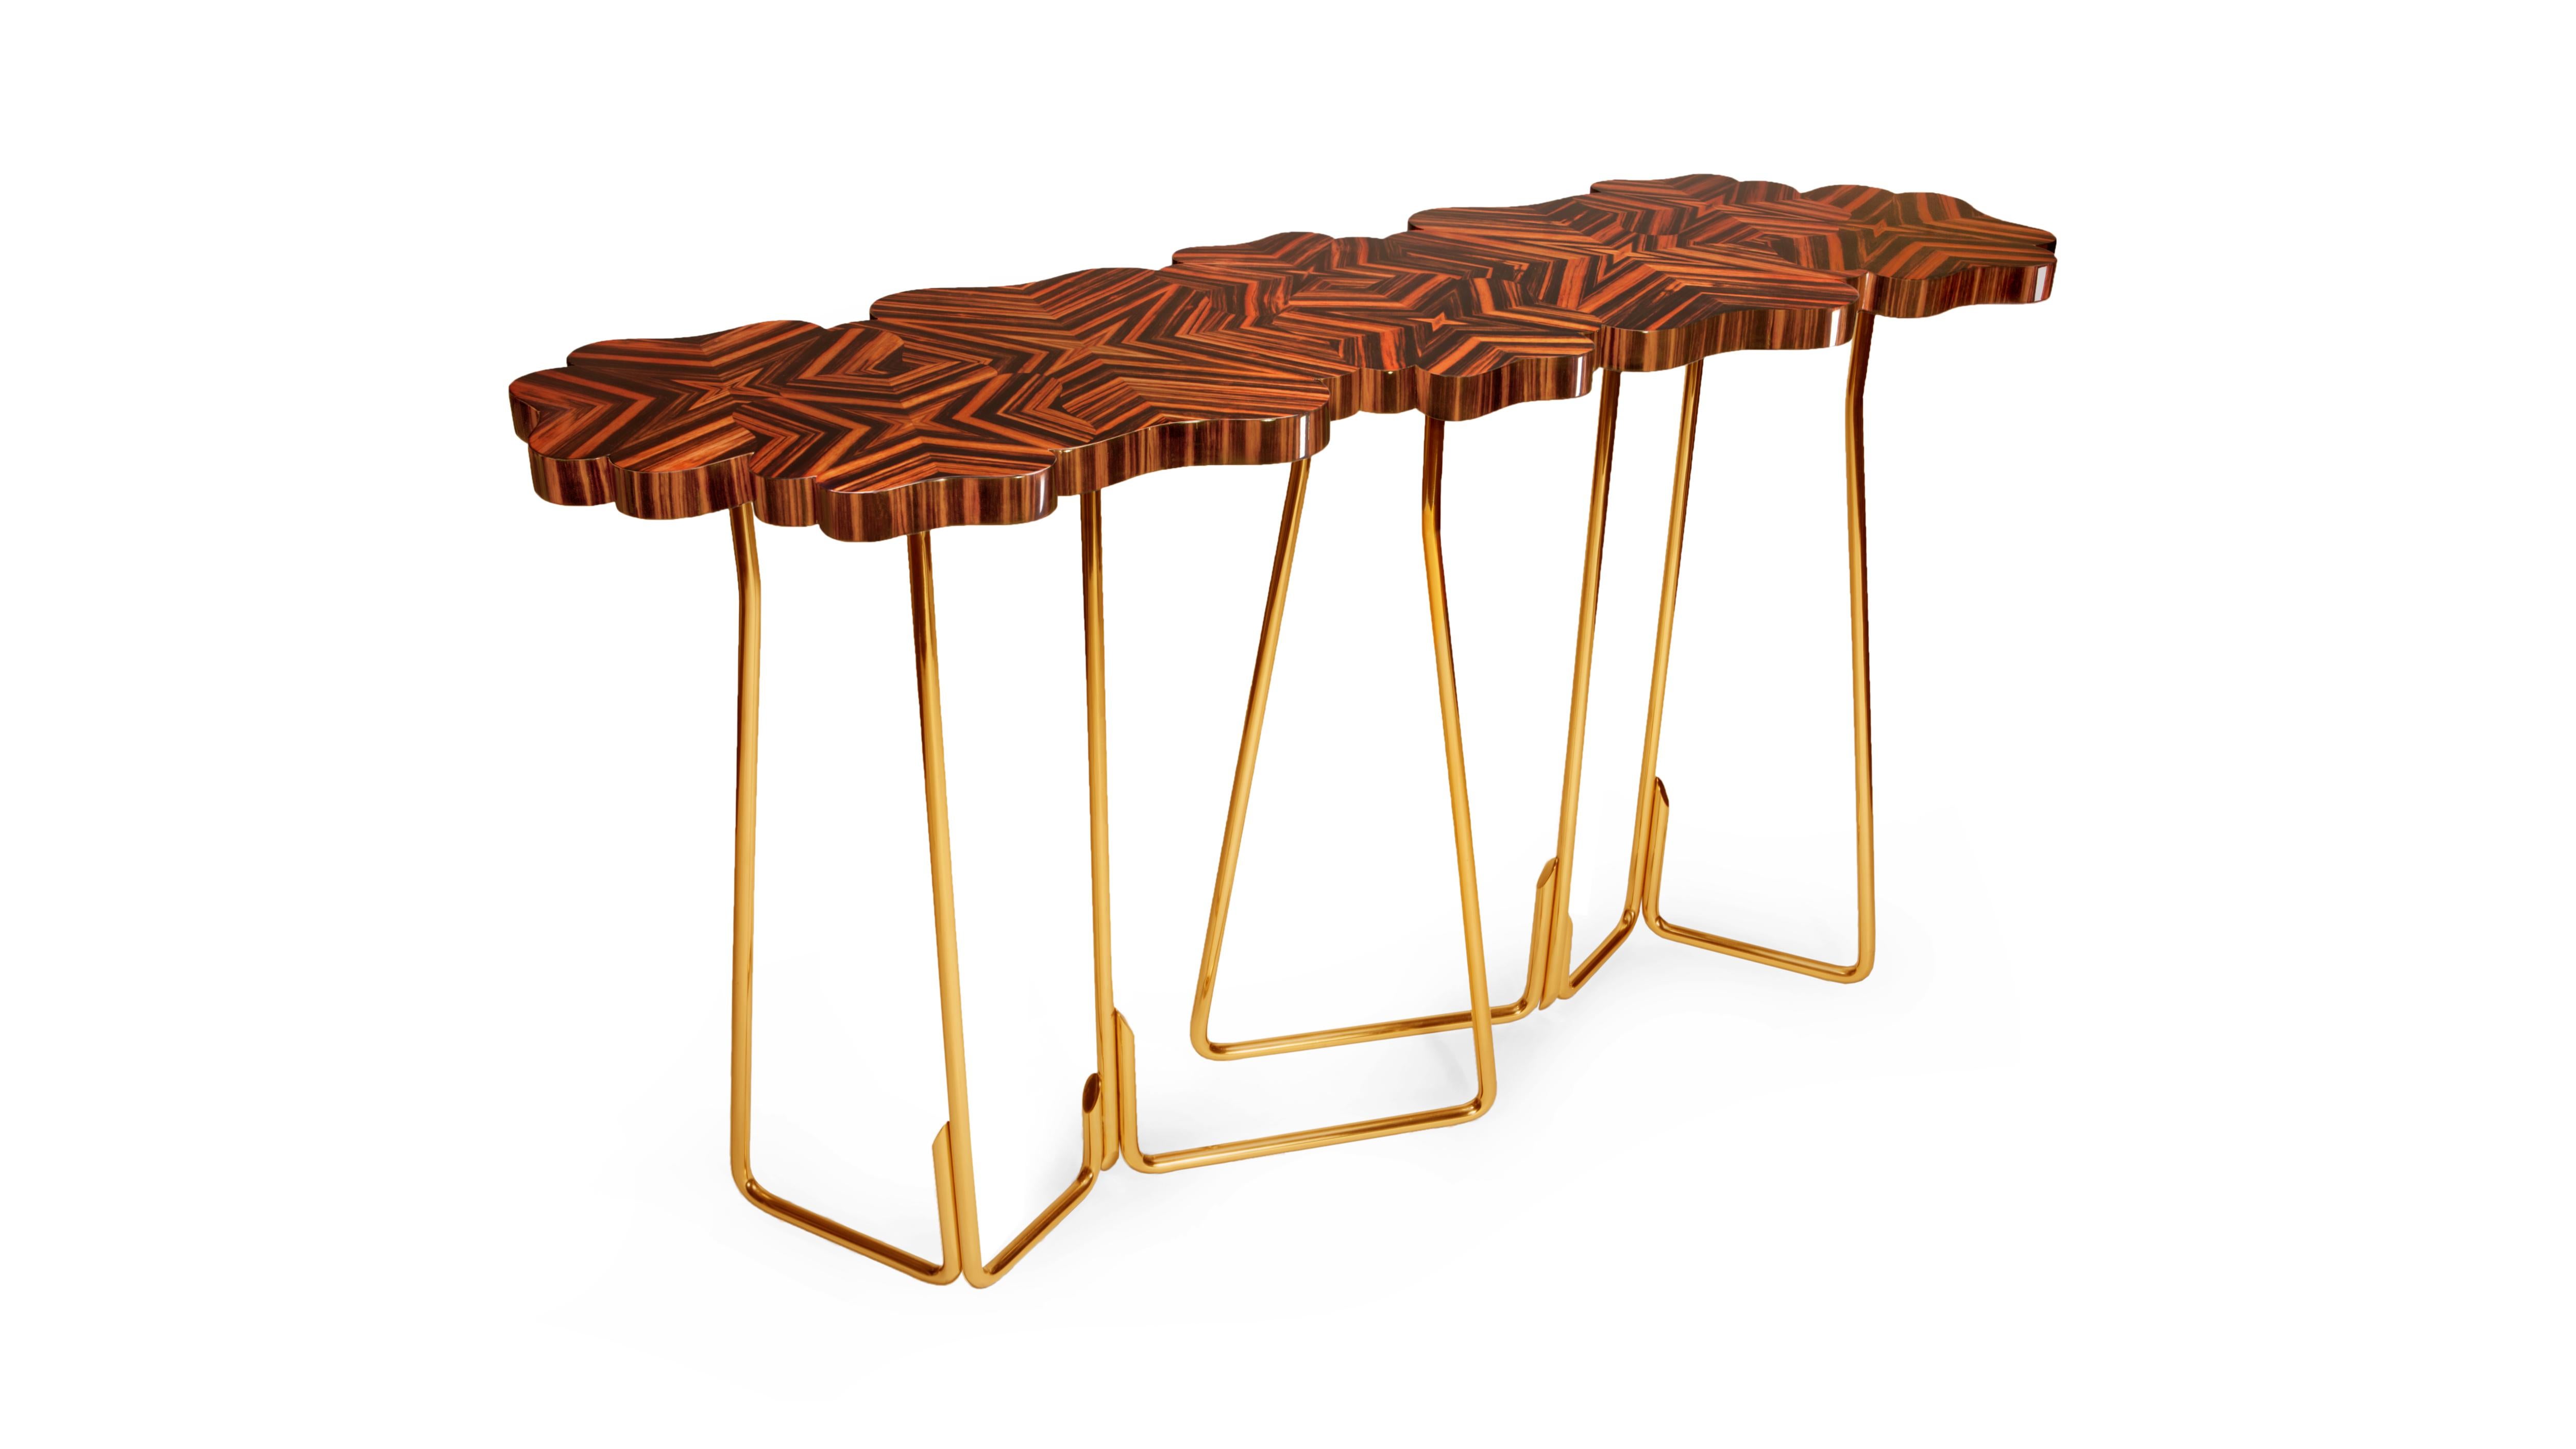 Four... For Luck Ebony Console by InsidherLand
Dimensions: D 45 x W 150 x H 90 cm.
Materials: marquetry work in ebony veneer, solid polished brass.
50 kg.
Also available in rosewood.

Continuing the interpretation of the Legend of the four leaf